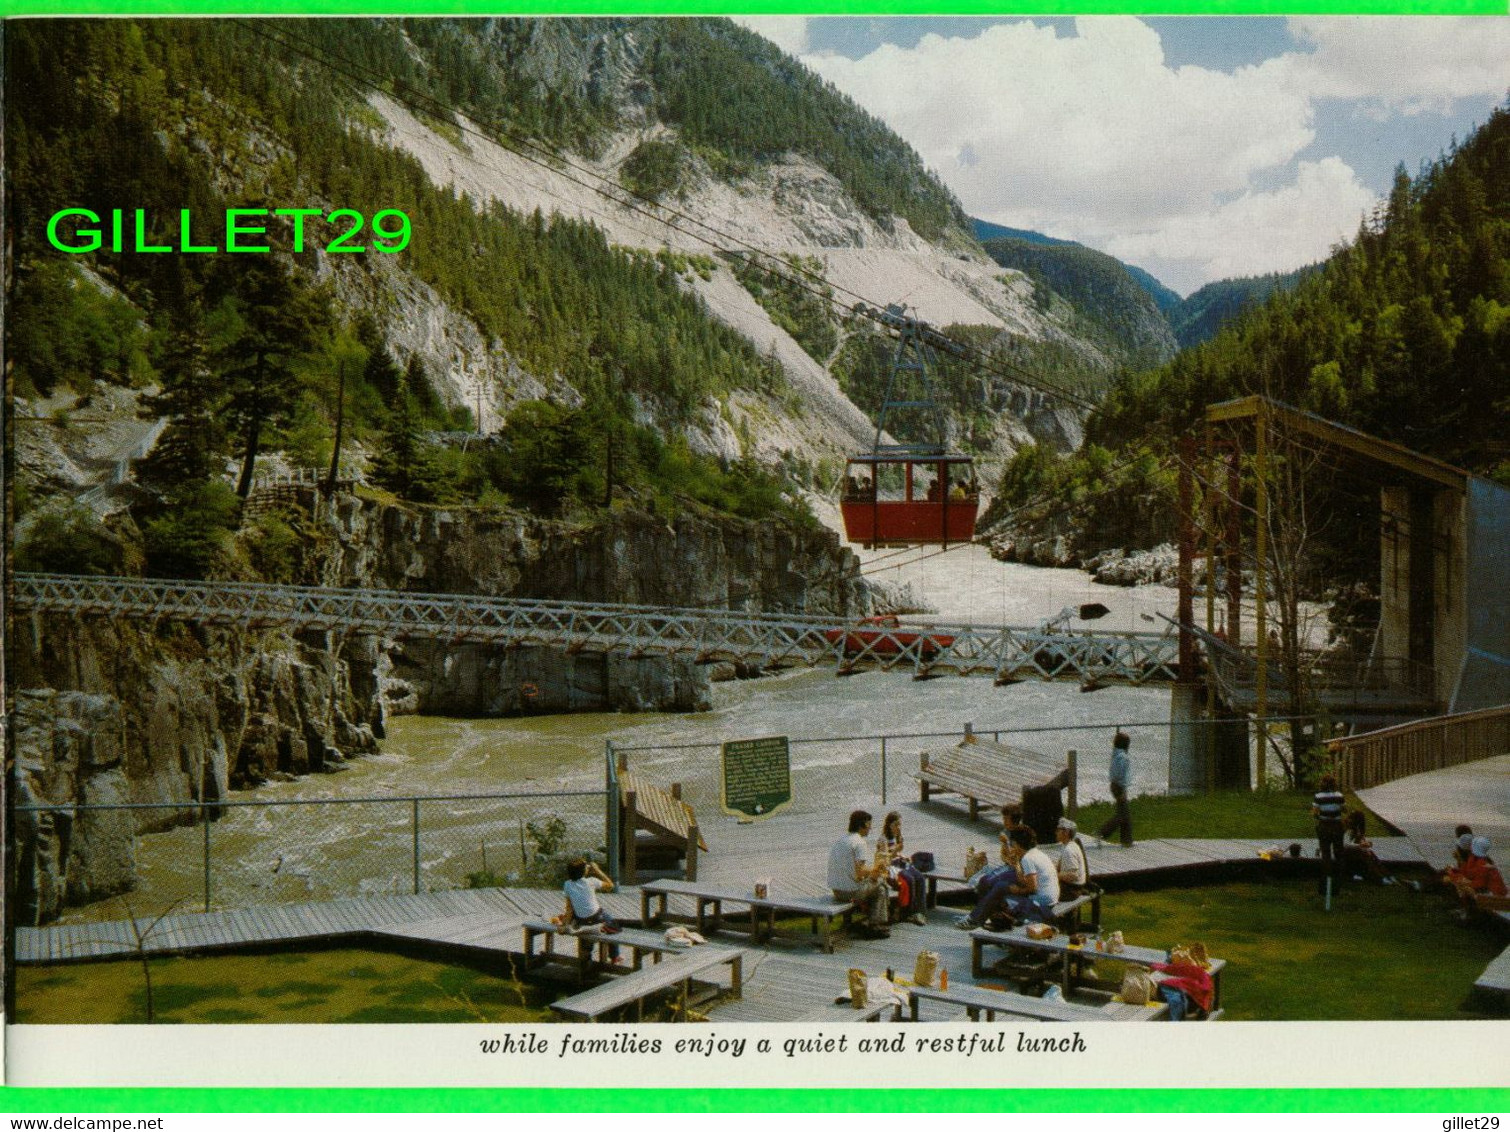 A SOUVENUR ALBUM OF HELL'S GATE AIRTRAM, FRASER CANYON, BC IN 1978 - 20 PAGES - - America Del Nord